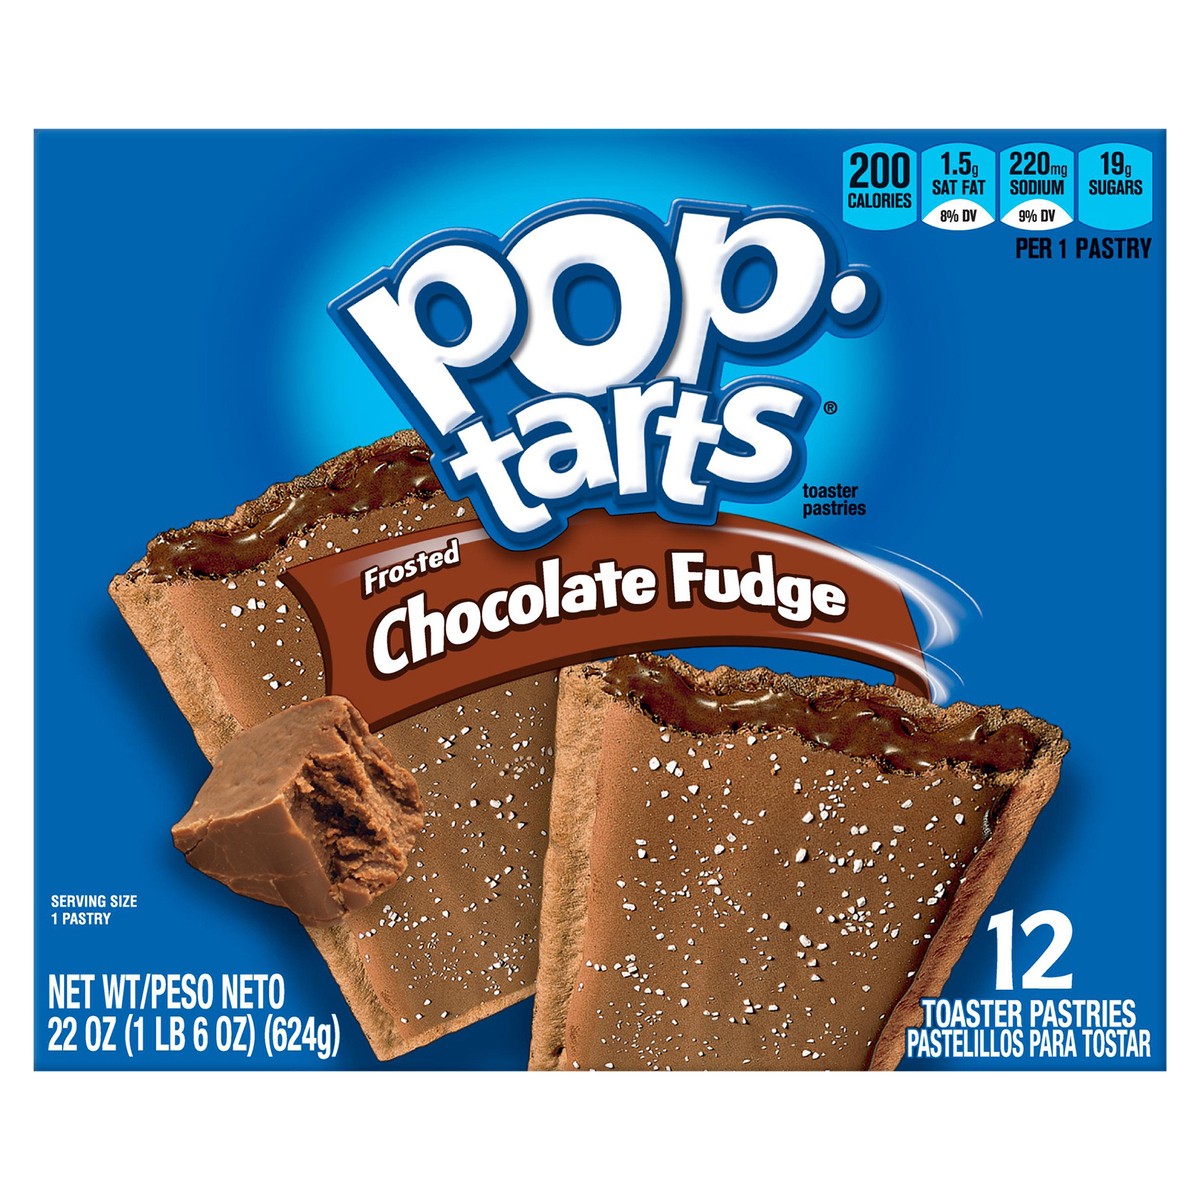 slide 10 of 10, Pop-Tarts Frosted Chocolate Fudge Pastries, 12 ct